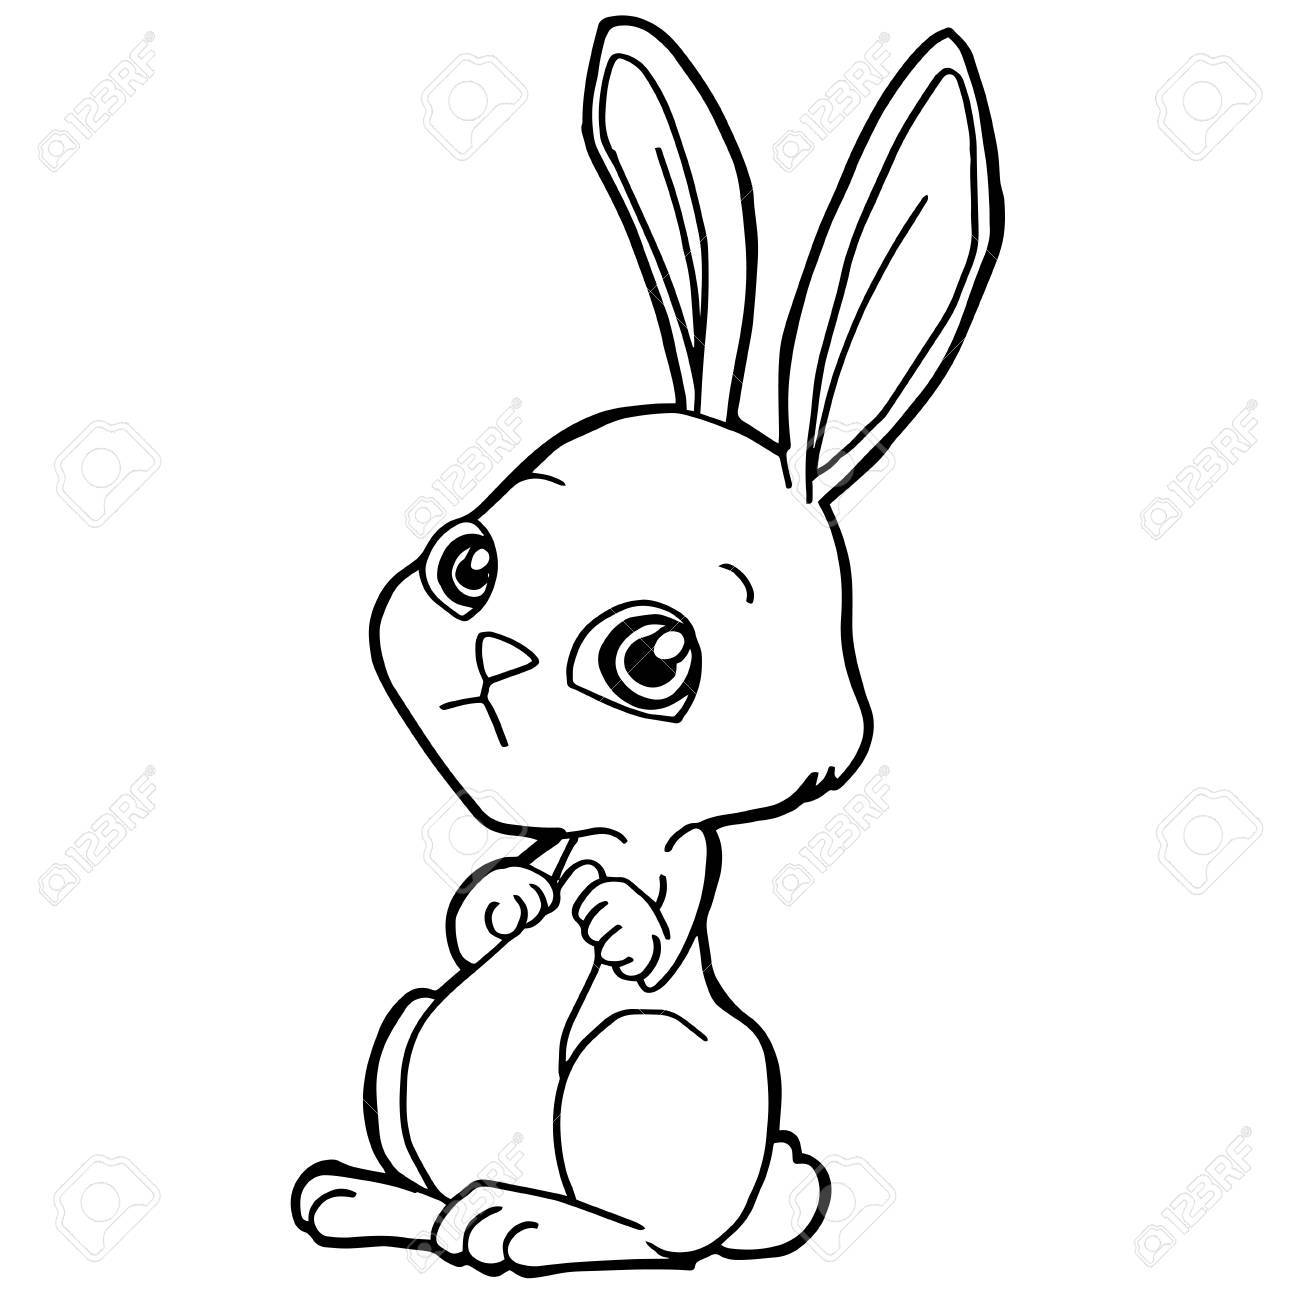 Cartoon Rabbit Coloring Pages at GetDrawings.com | Free for personal